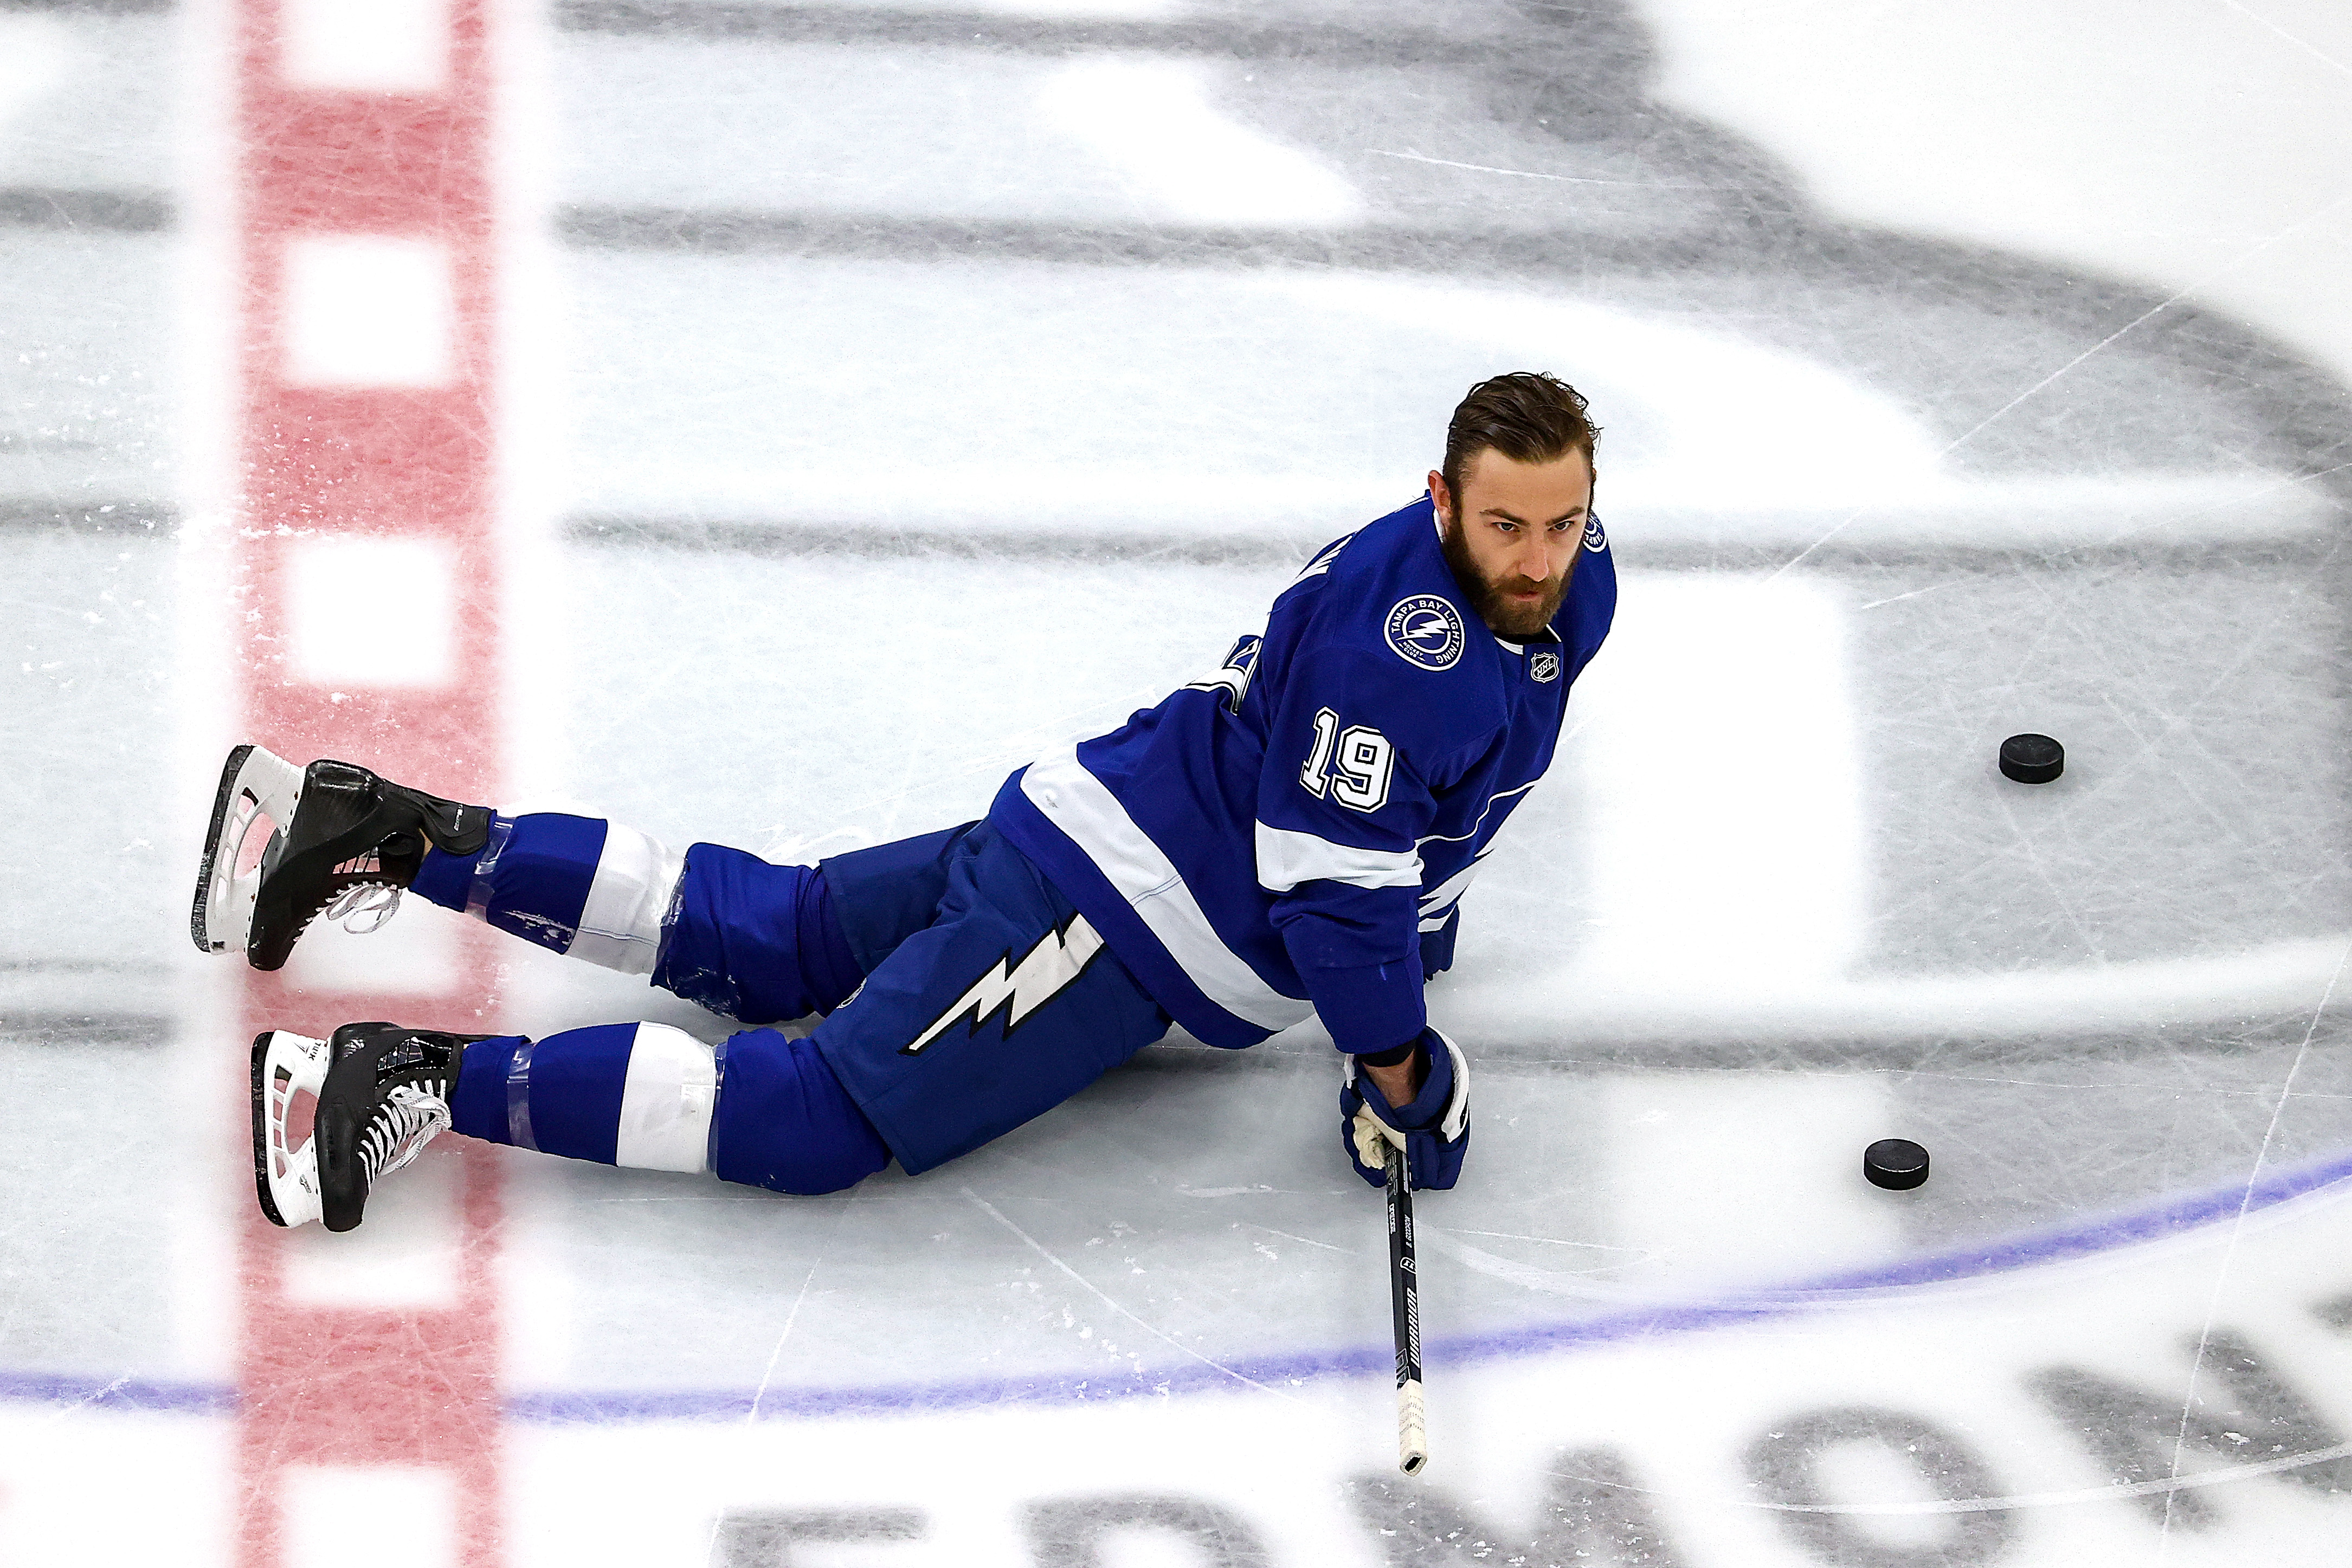 EDMONTON, ALBERTA - SEPTEMBER 15: Barclay Goodrow #19 of the Tampa Bay Lightning stretches in warm-ups prior to Game Five of the Eastern Conference Final against the New York Islanders during the 2020 NHL Stanley Cup Playoffs at Rogers Place on September 15, 2020 in Edmonton, Alberta, Canada.